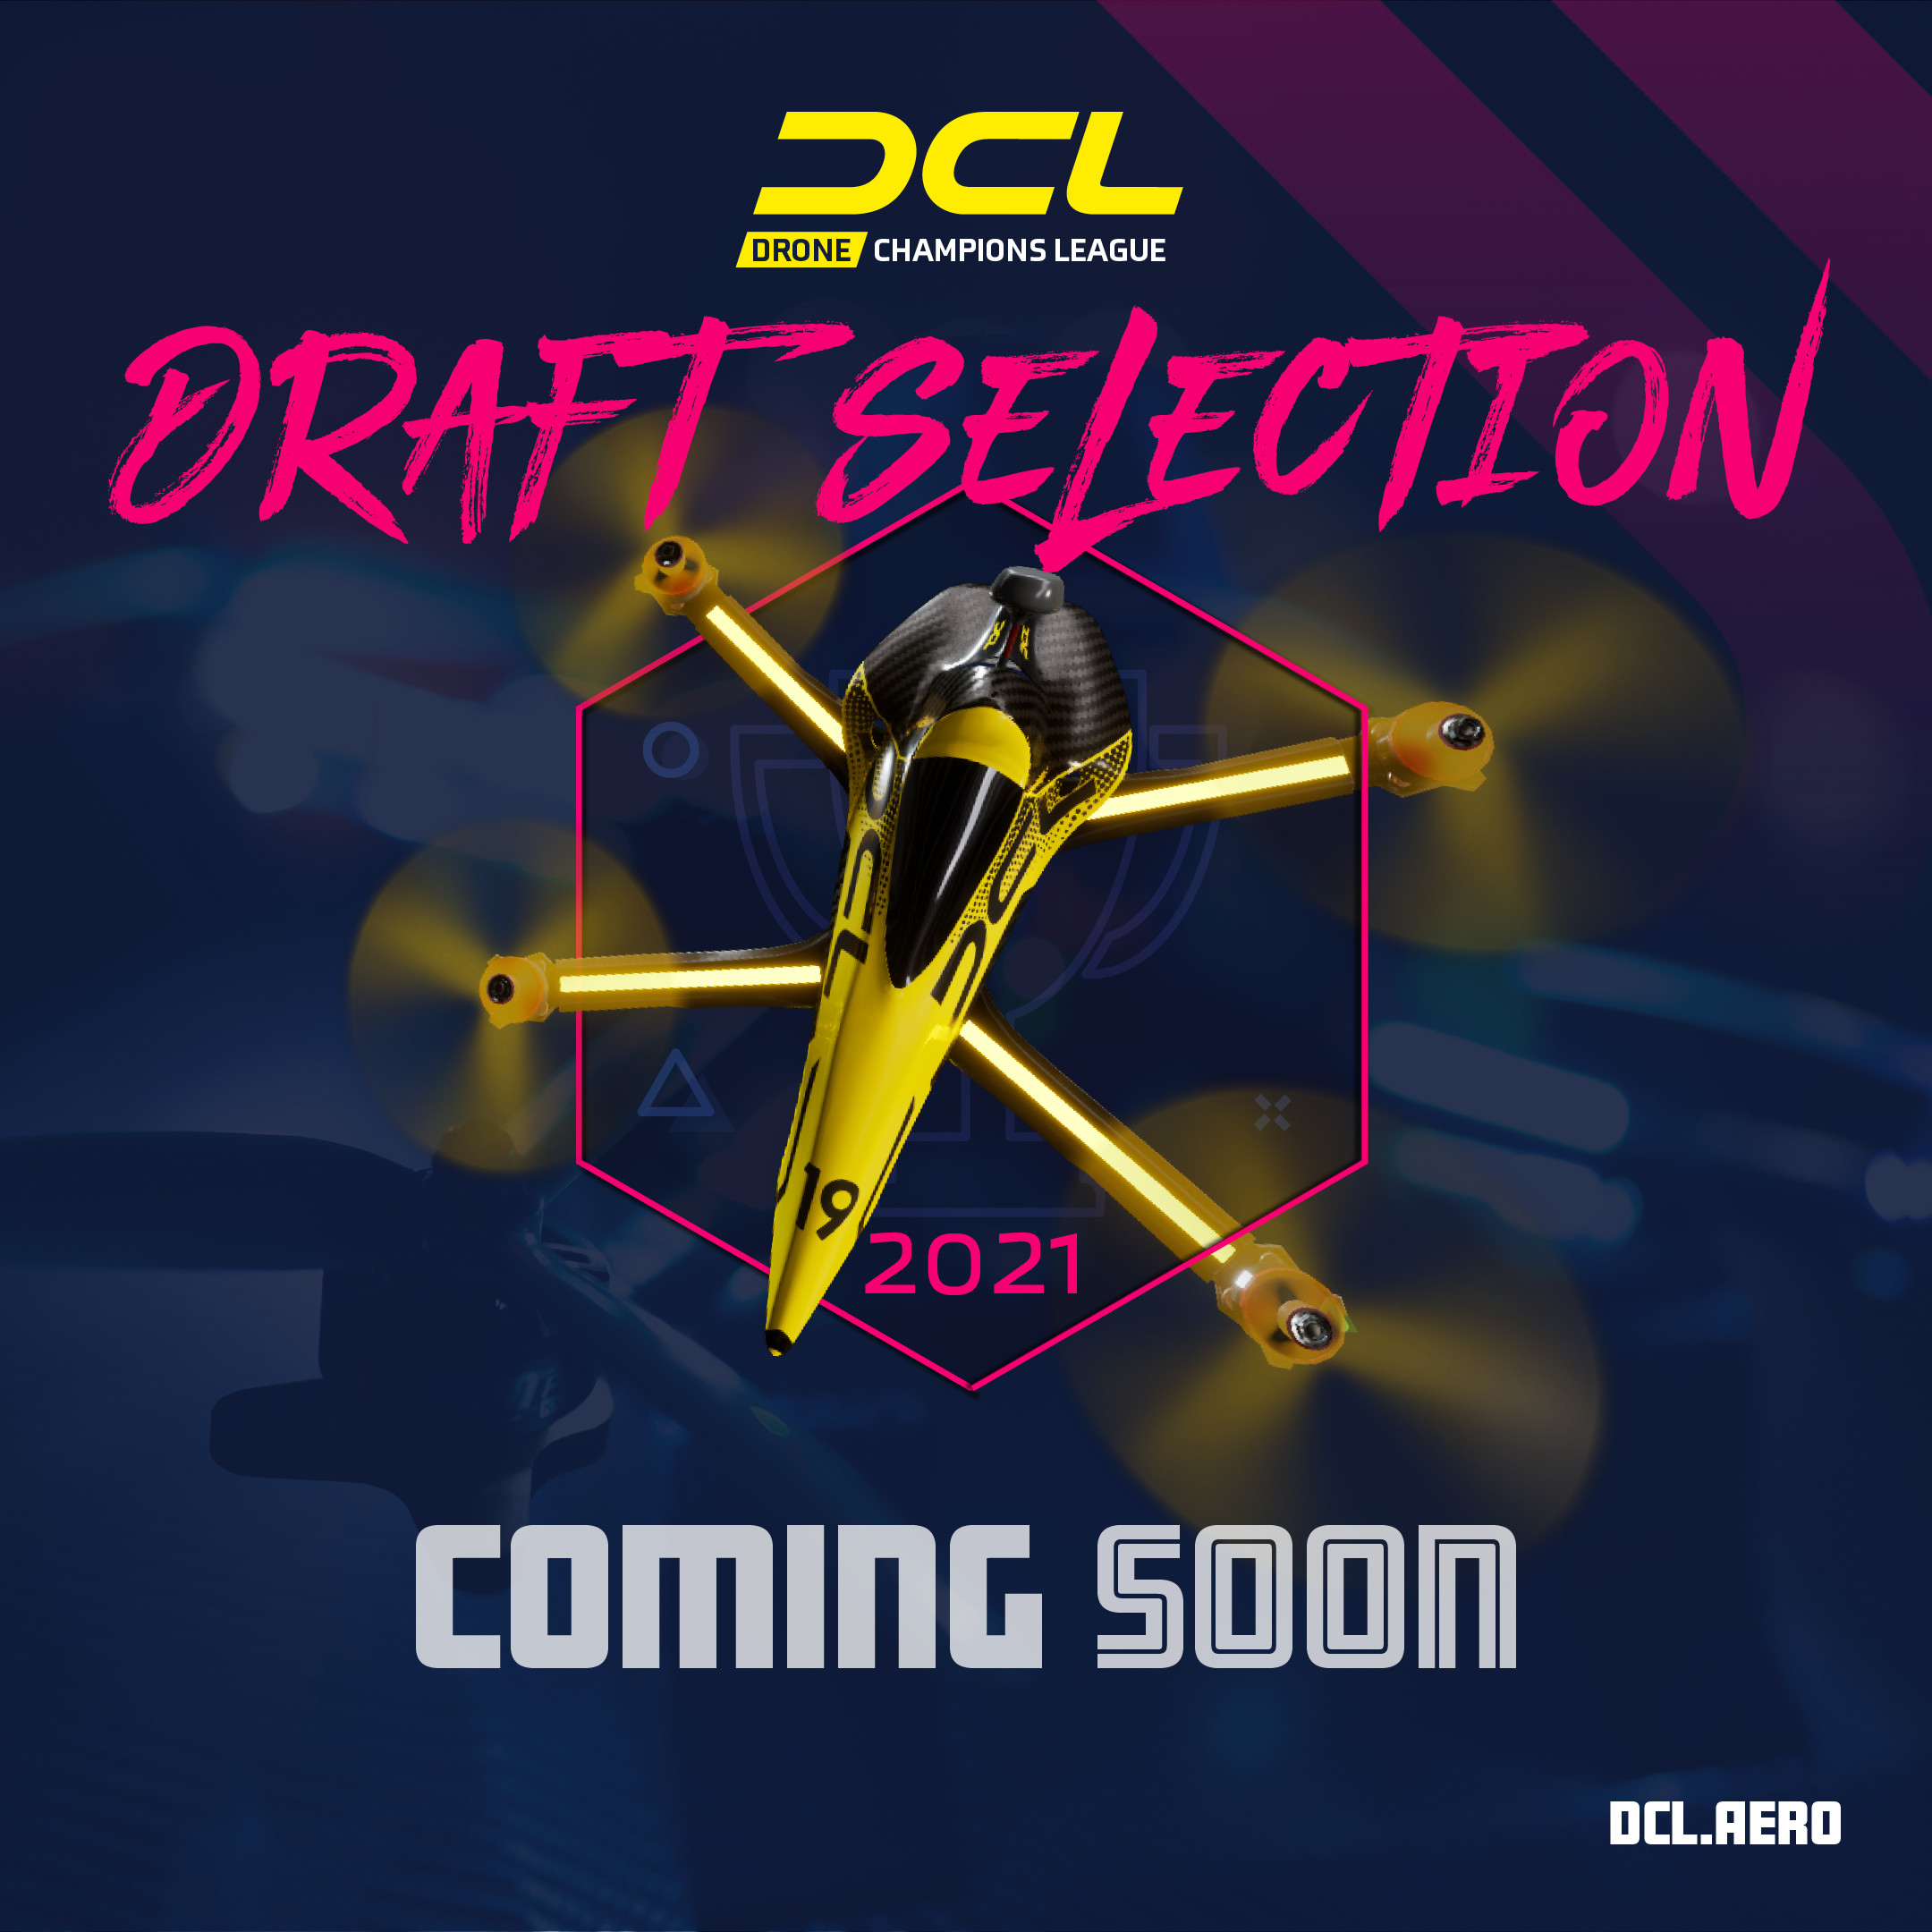 - Drone Champions League on Twitter: "THE DRAFT QUALIFICATION STARTS NEXT WEEK! 🚀 Do you want to take in an official DCL Race? You can picked by one of